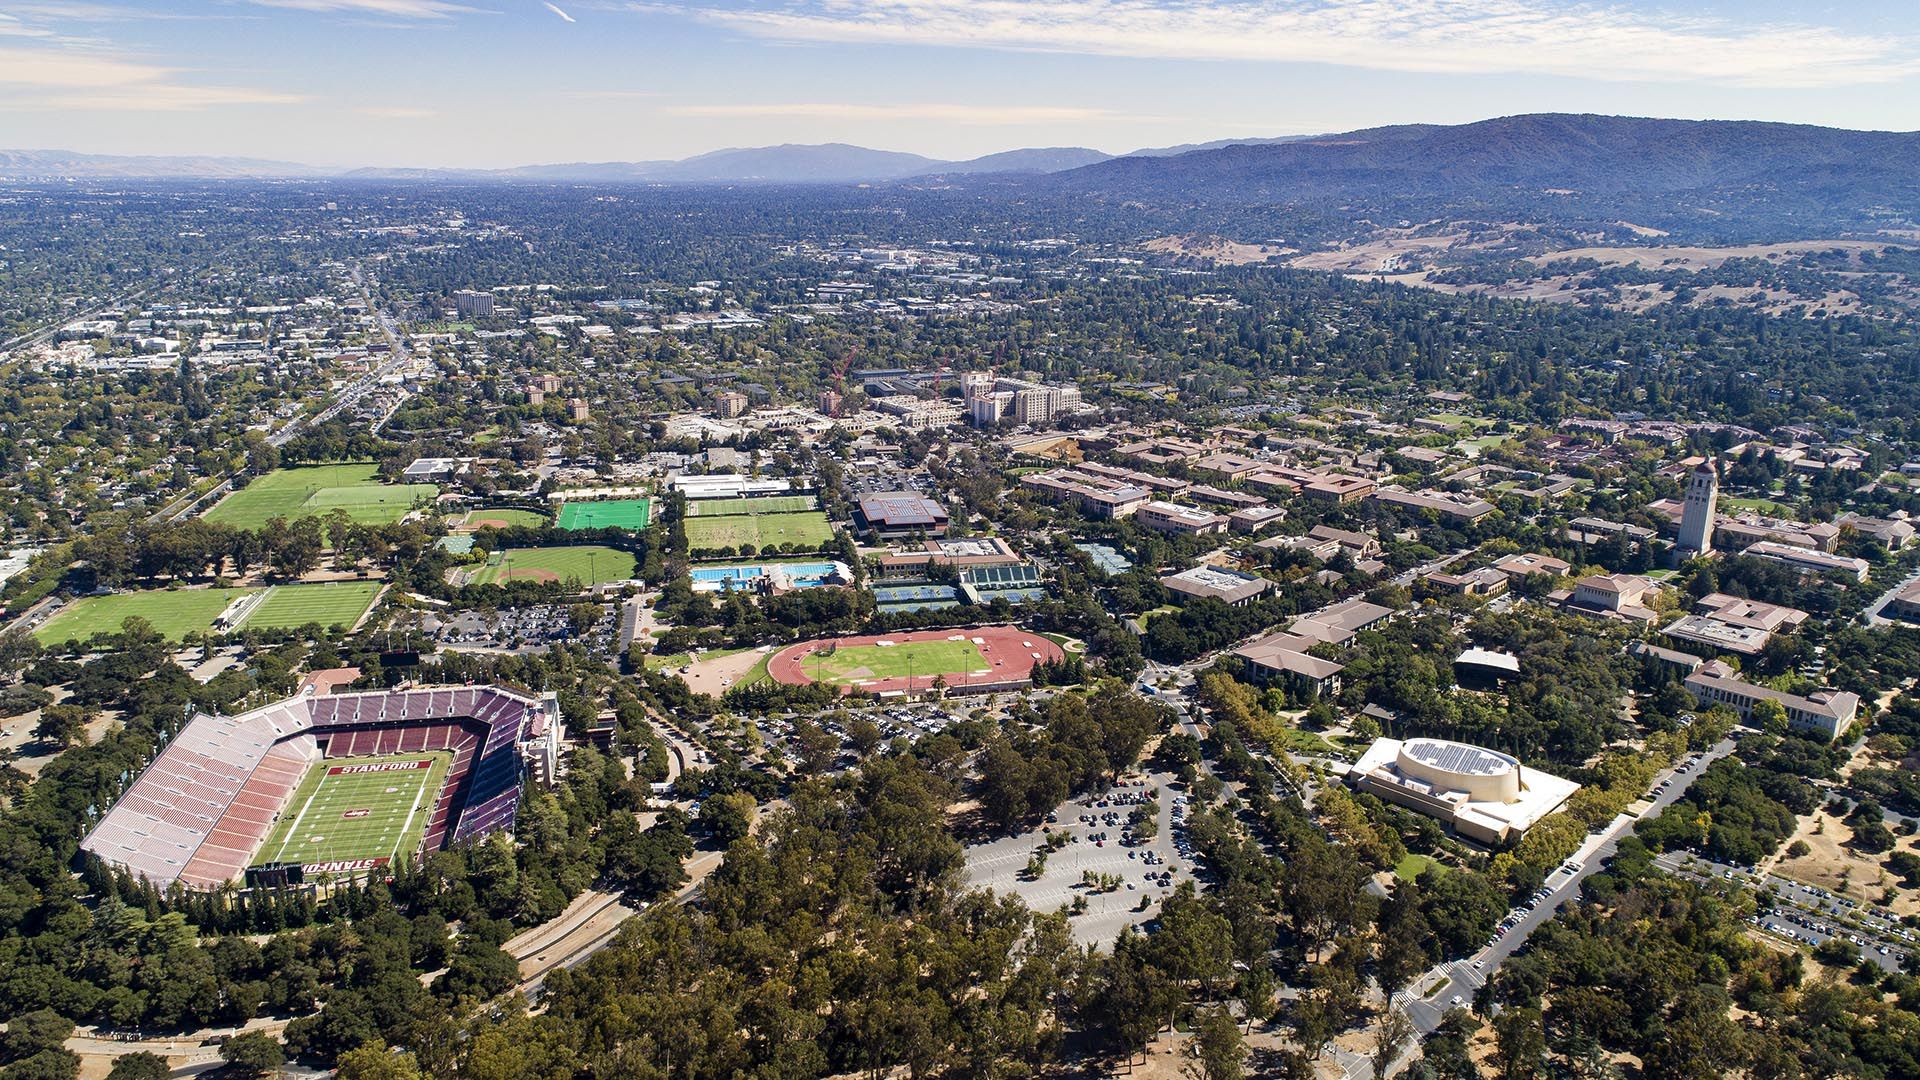 Stanford University Campus Planning and Projects